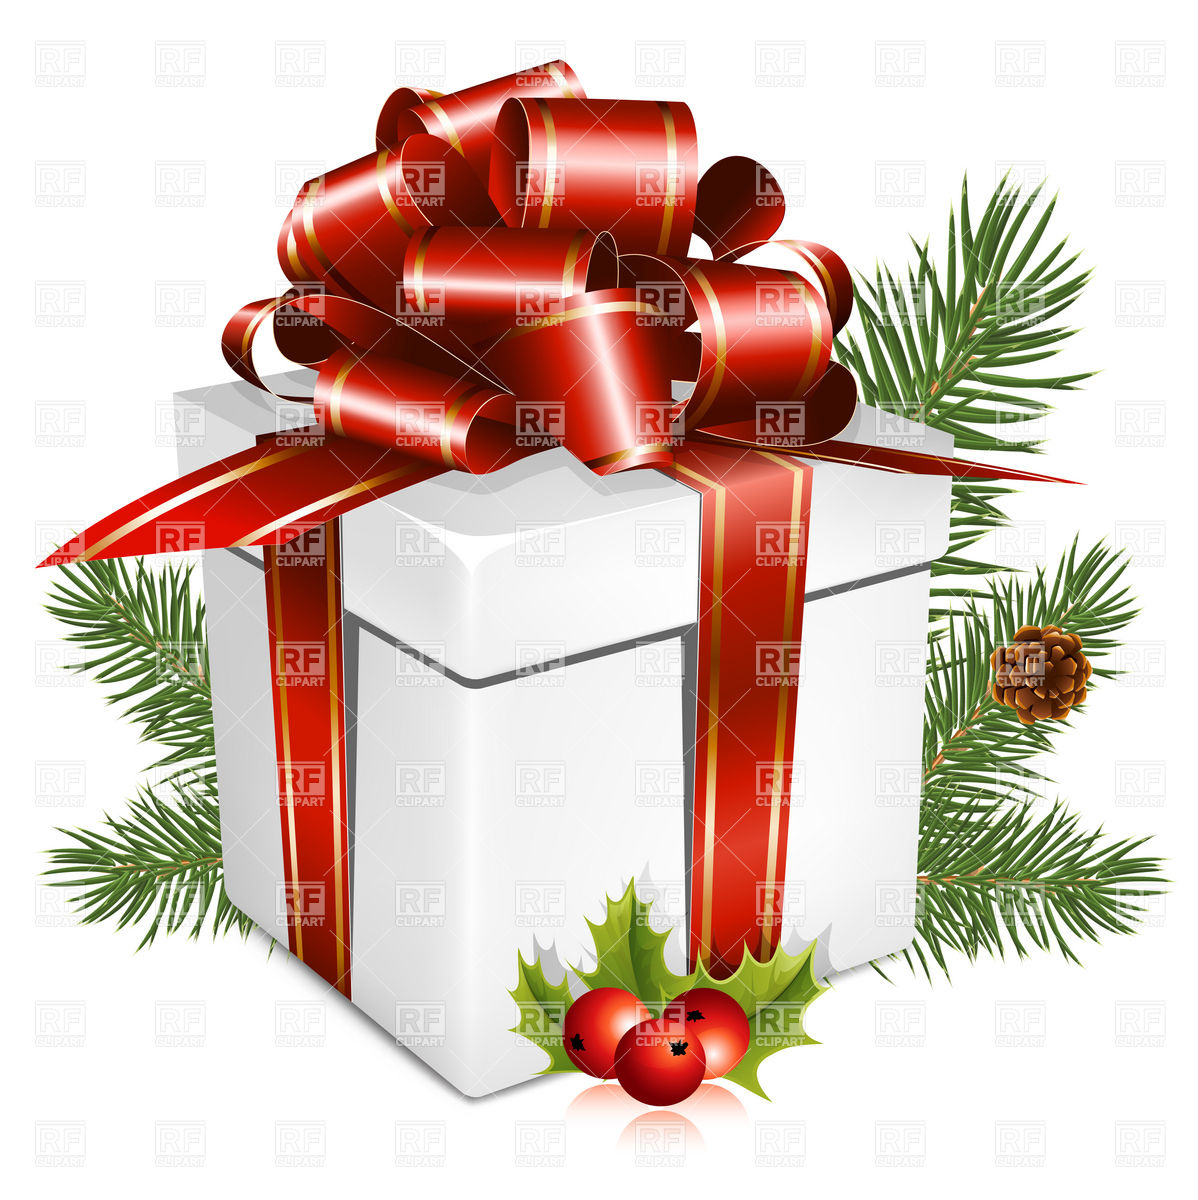 Merry Christmas Clipart Free Download.